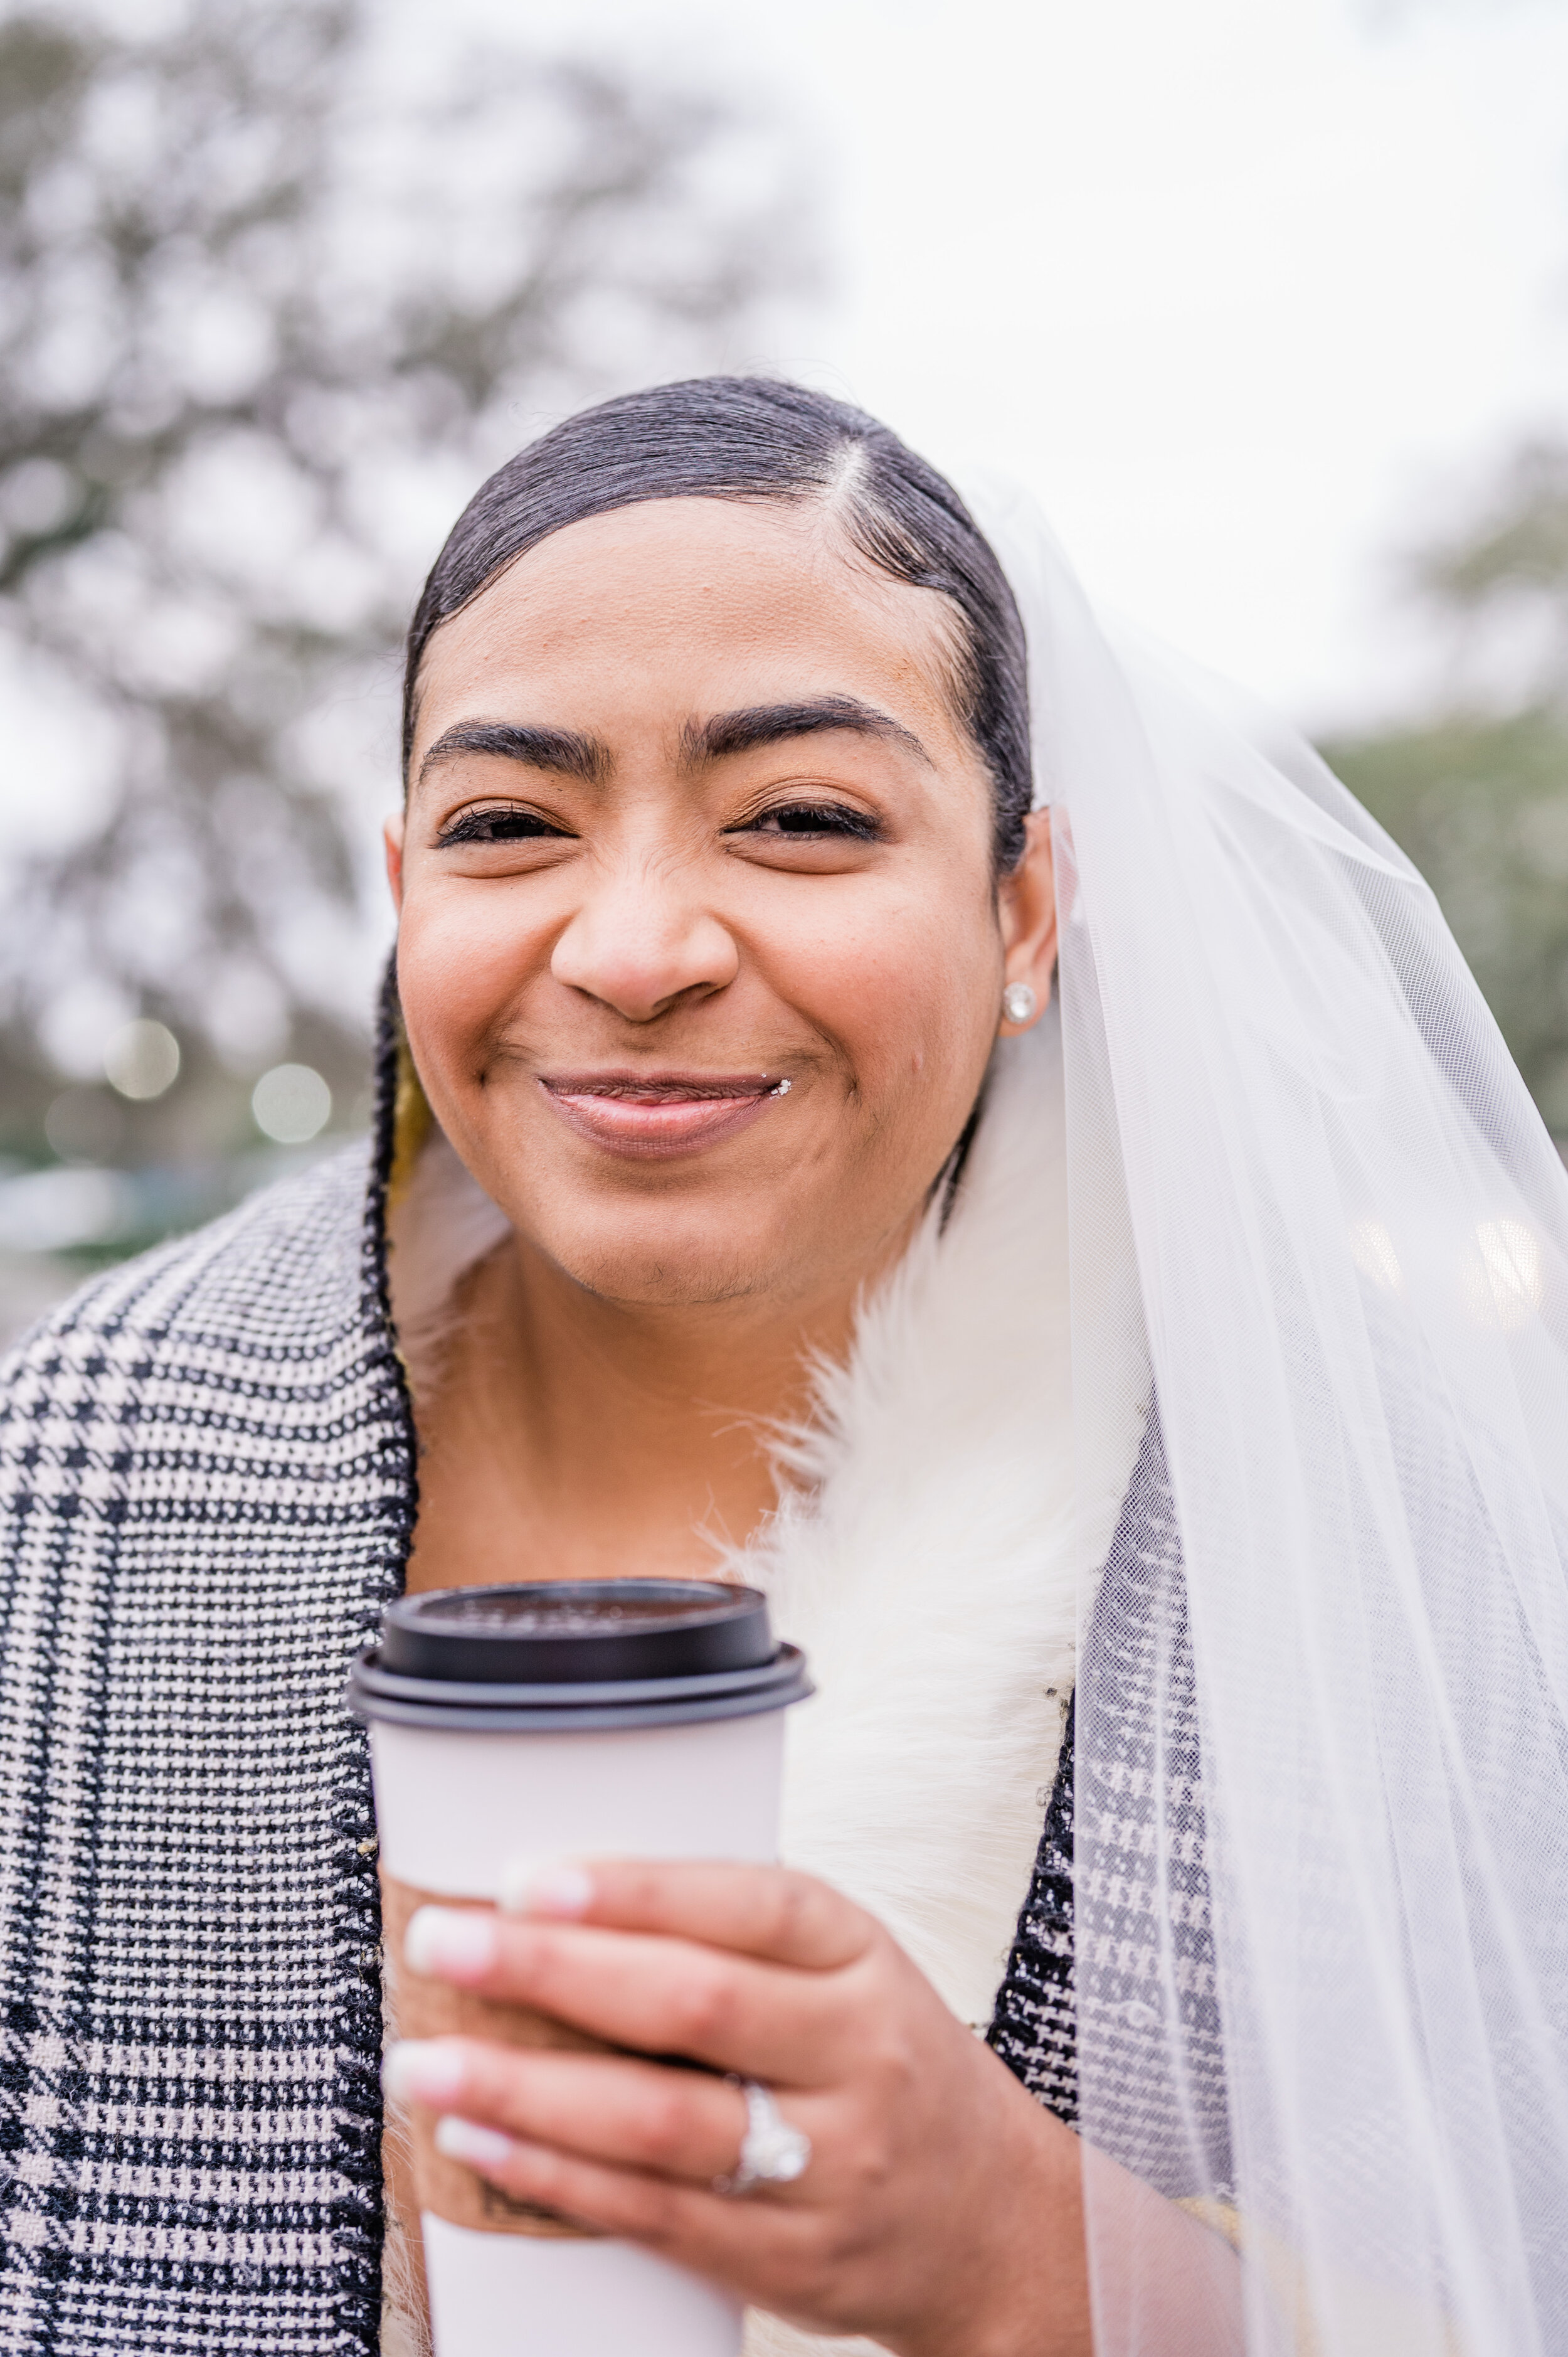 The bride smiles with coffee in her hand and powdered sugar on her face